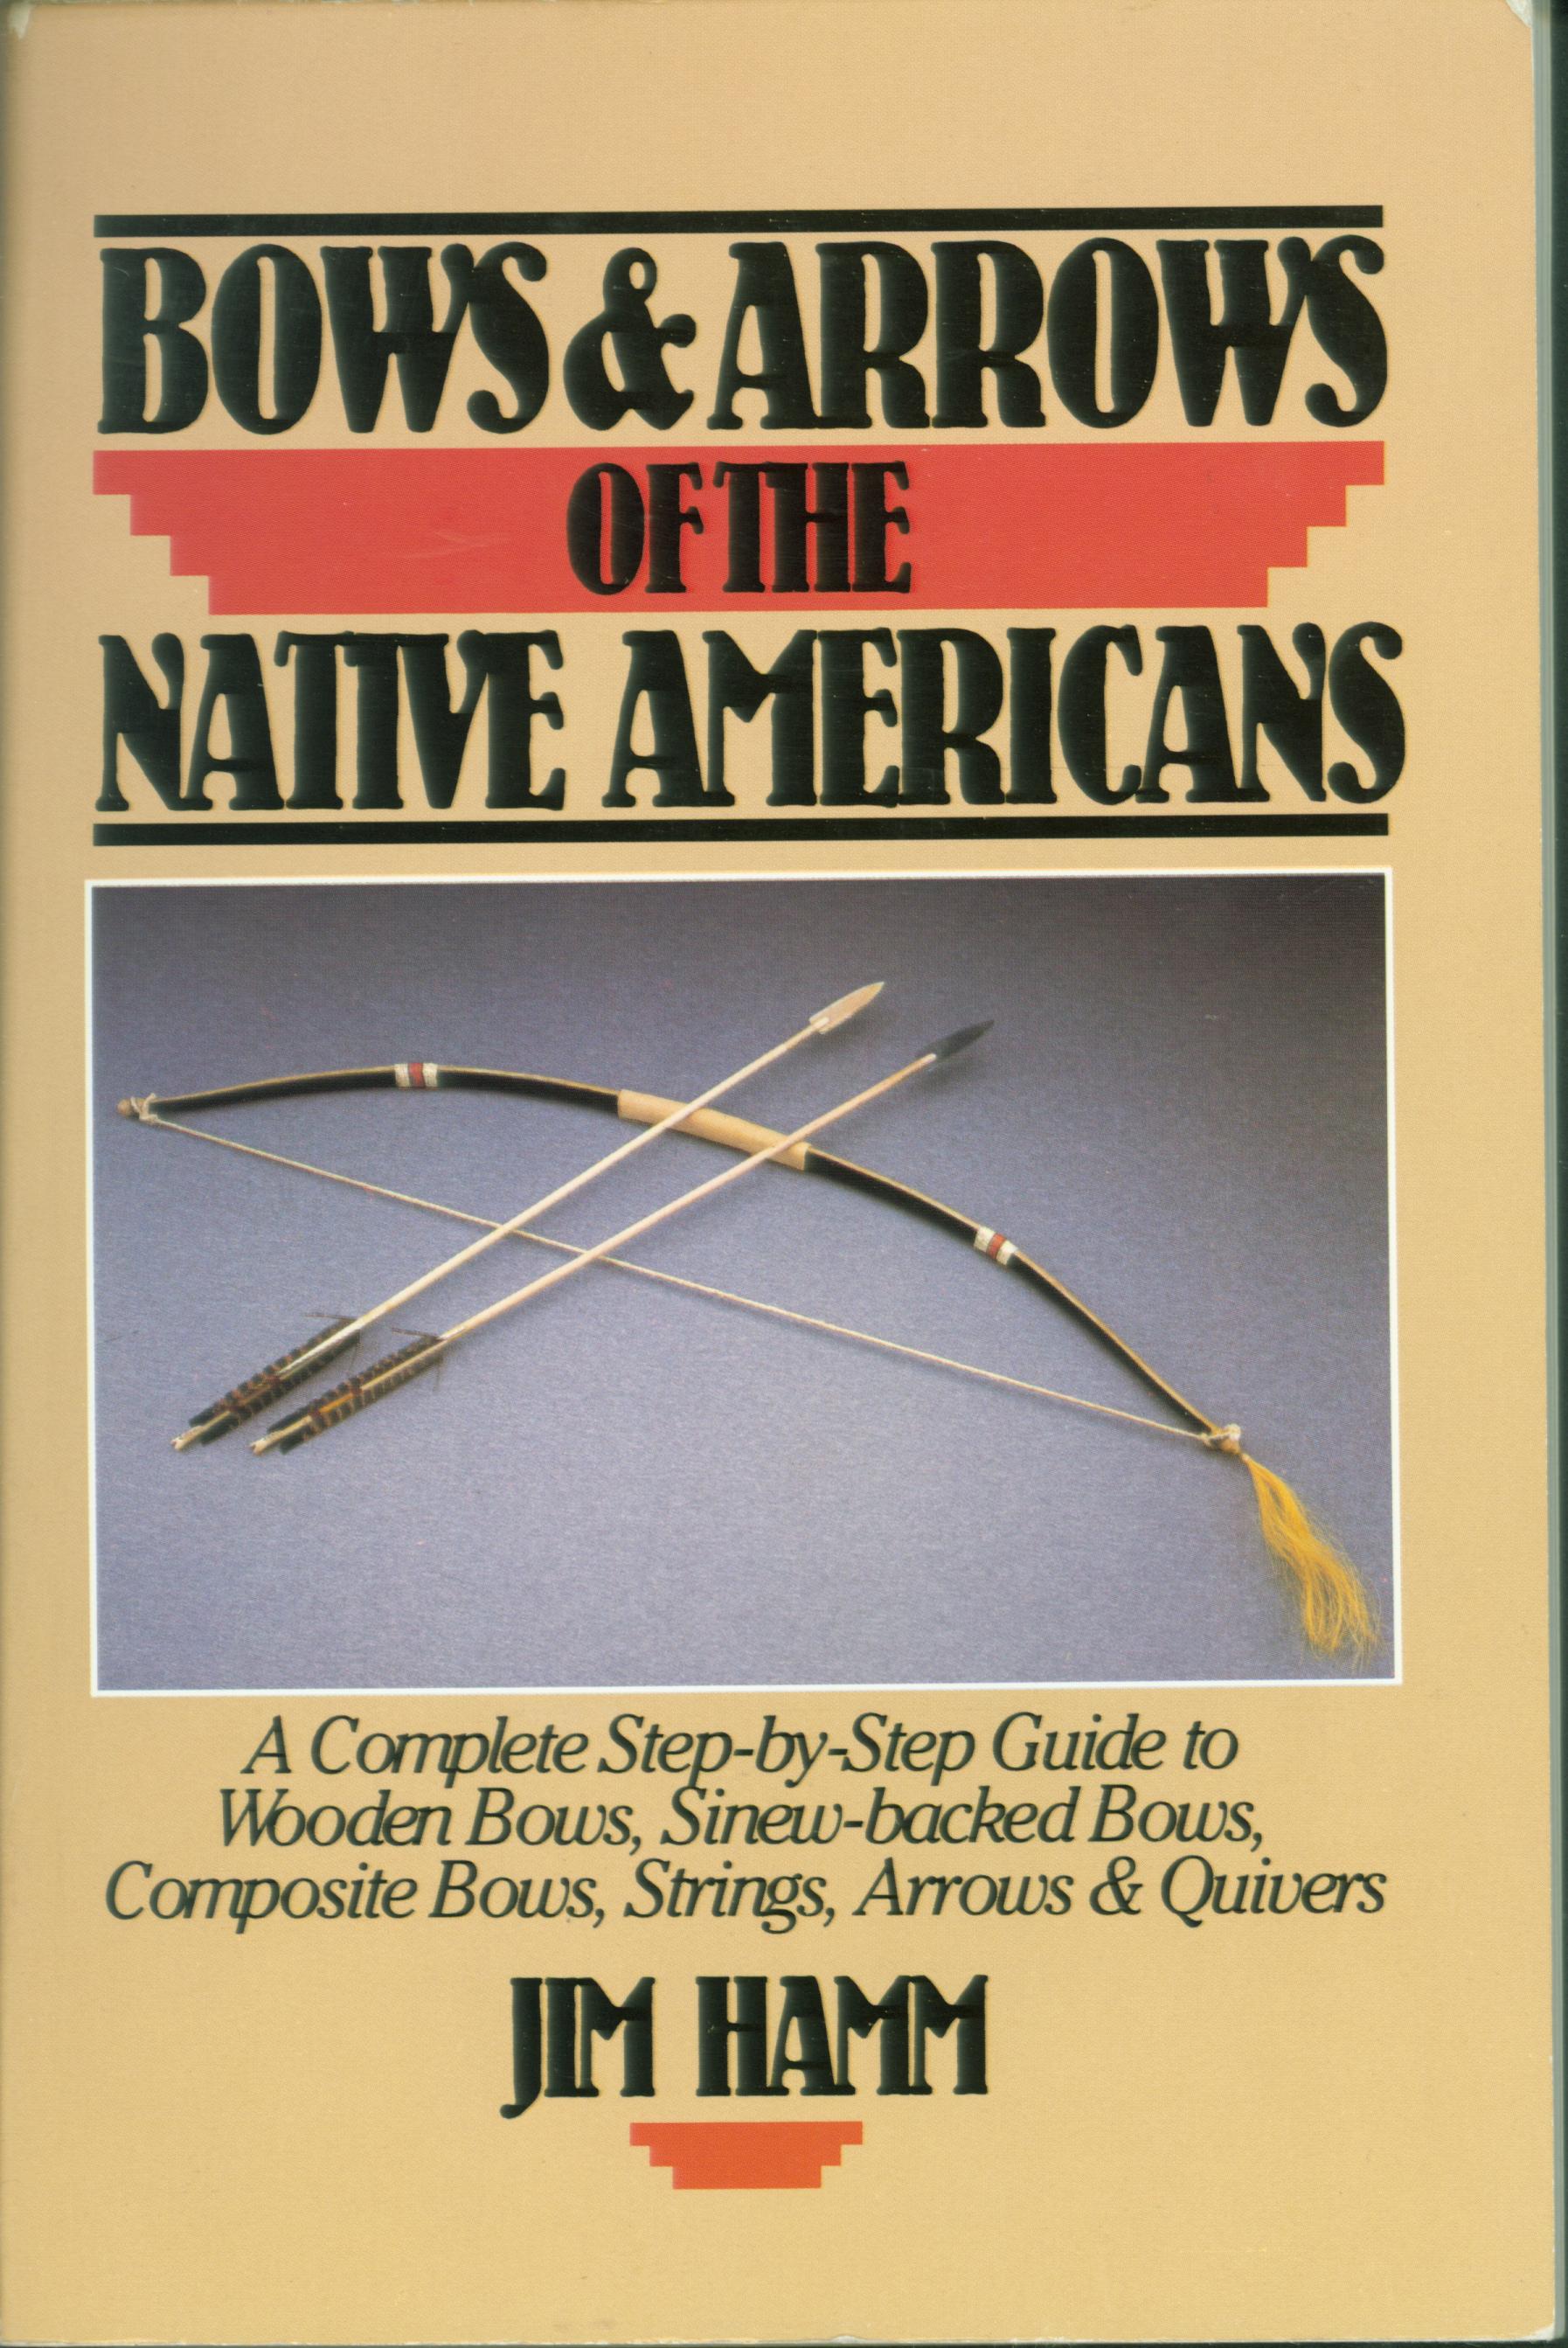 BOWS & ARROWS OF THE NATIVE AMERICANS